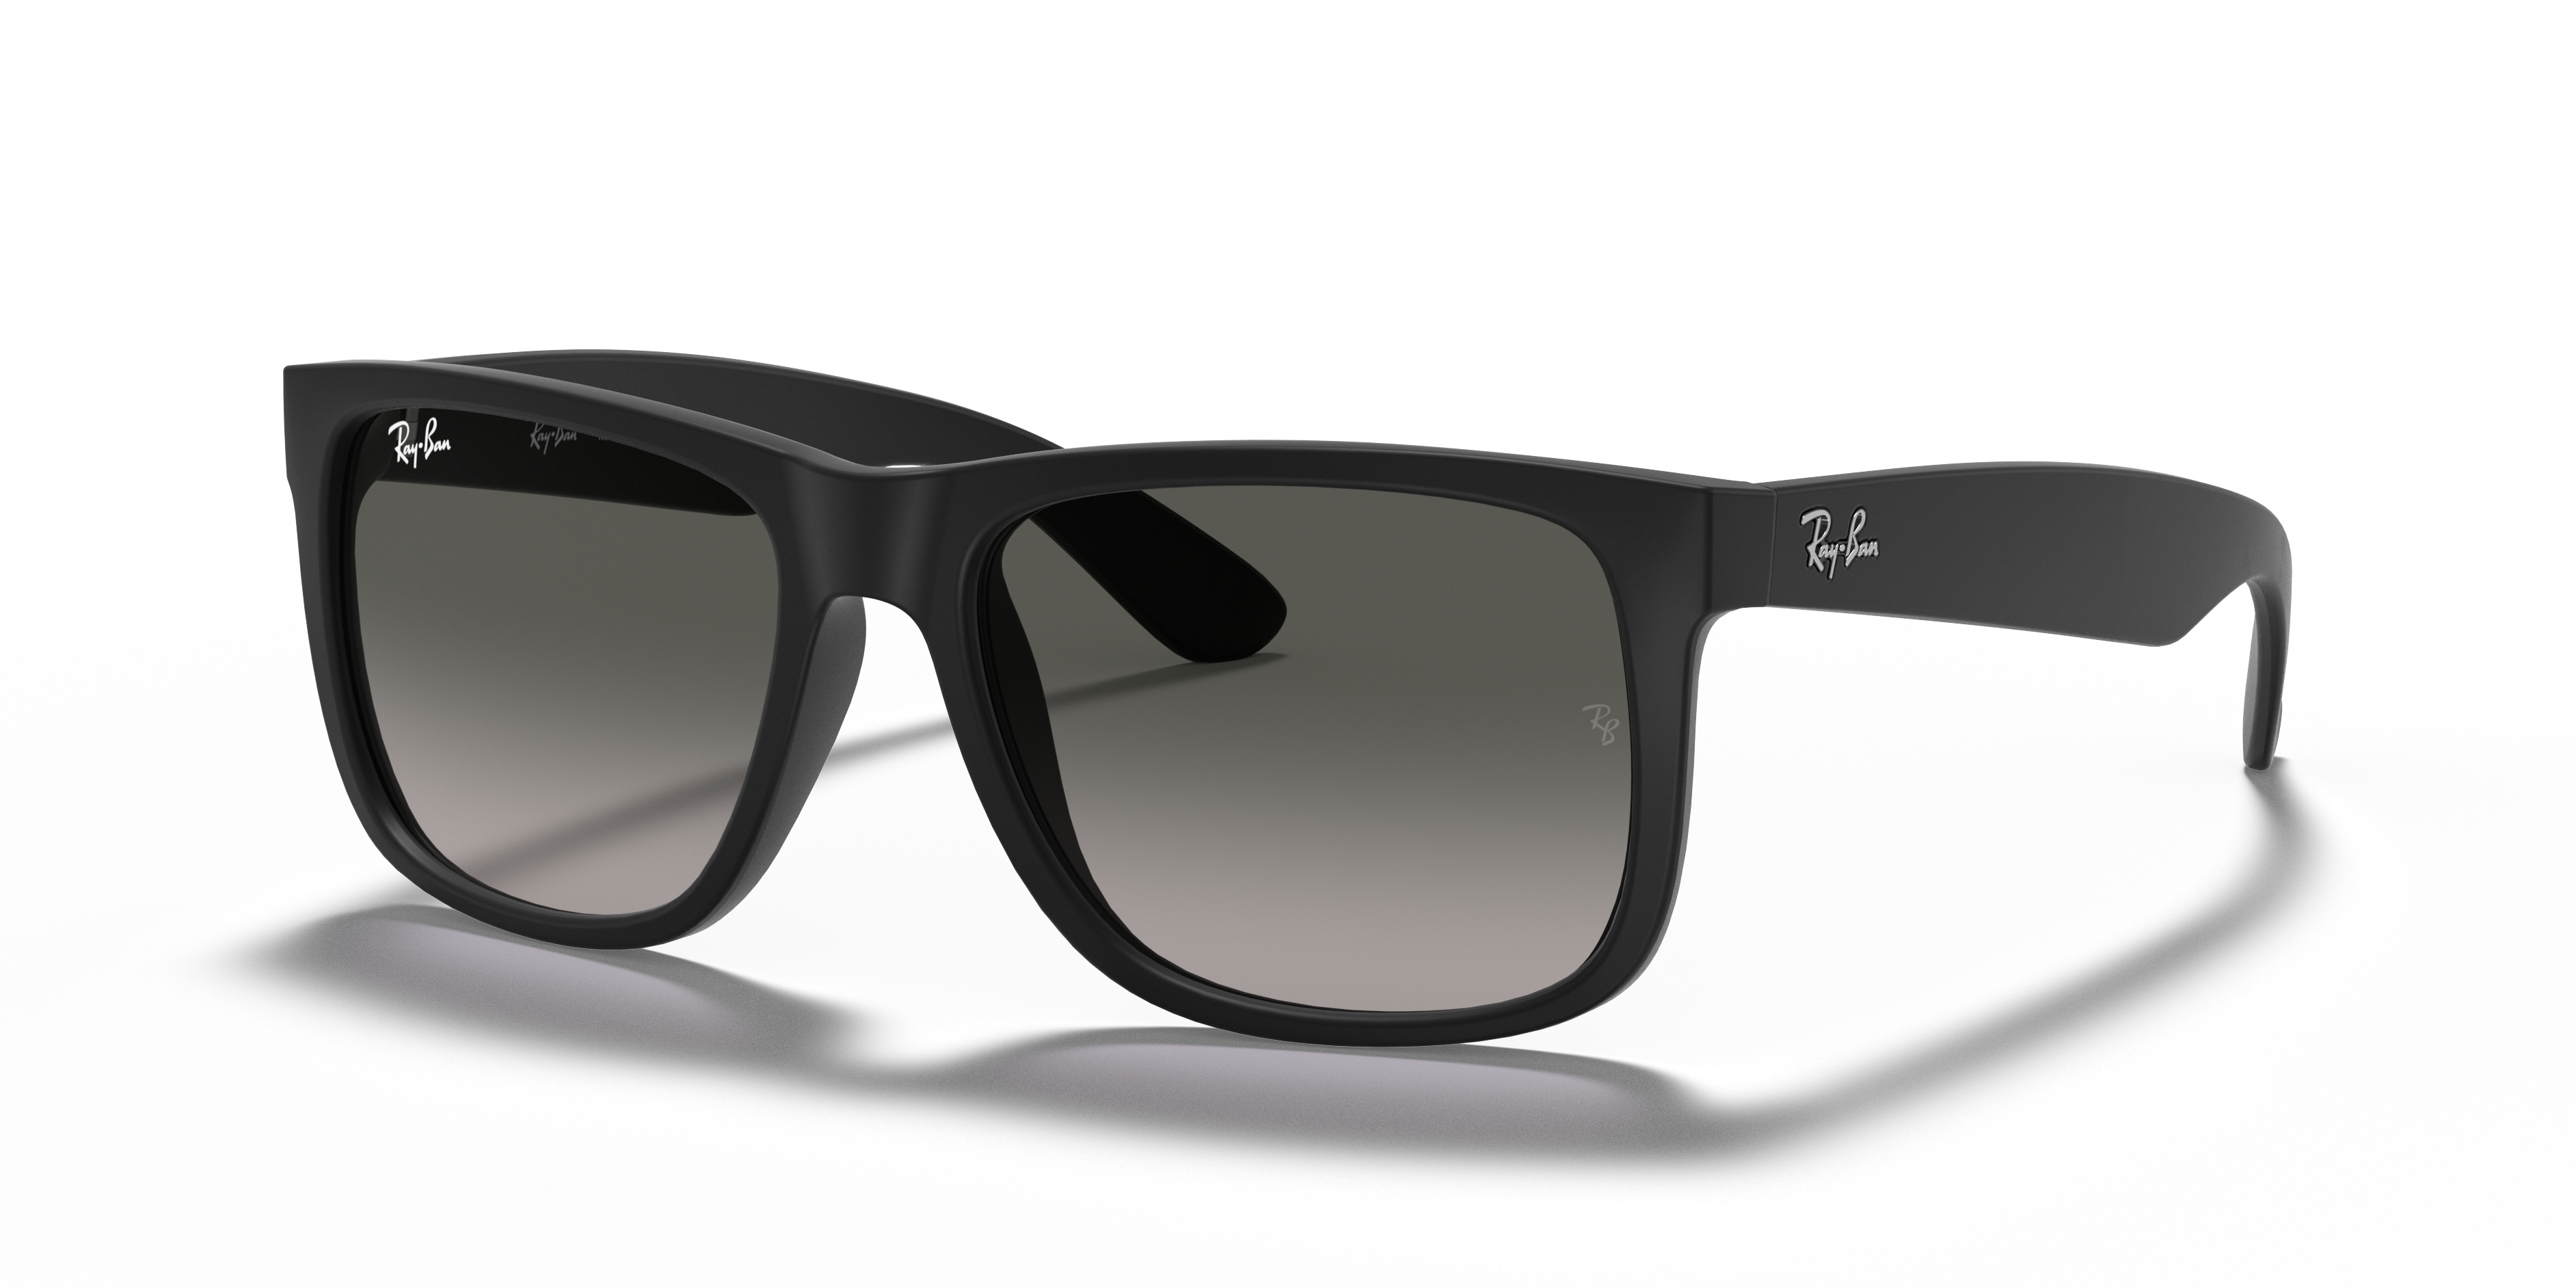 JUSTIN CLASSIC Sunglasses in Black and Dark Grey - RB4165 | Ray 